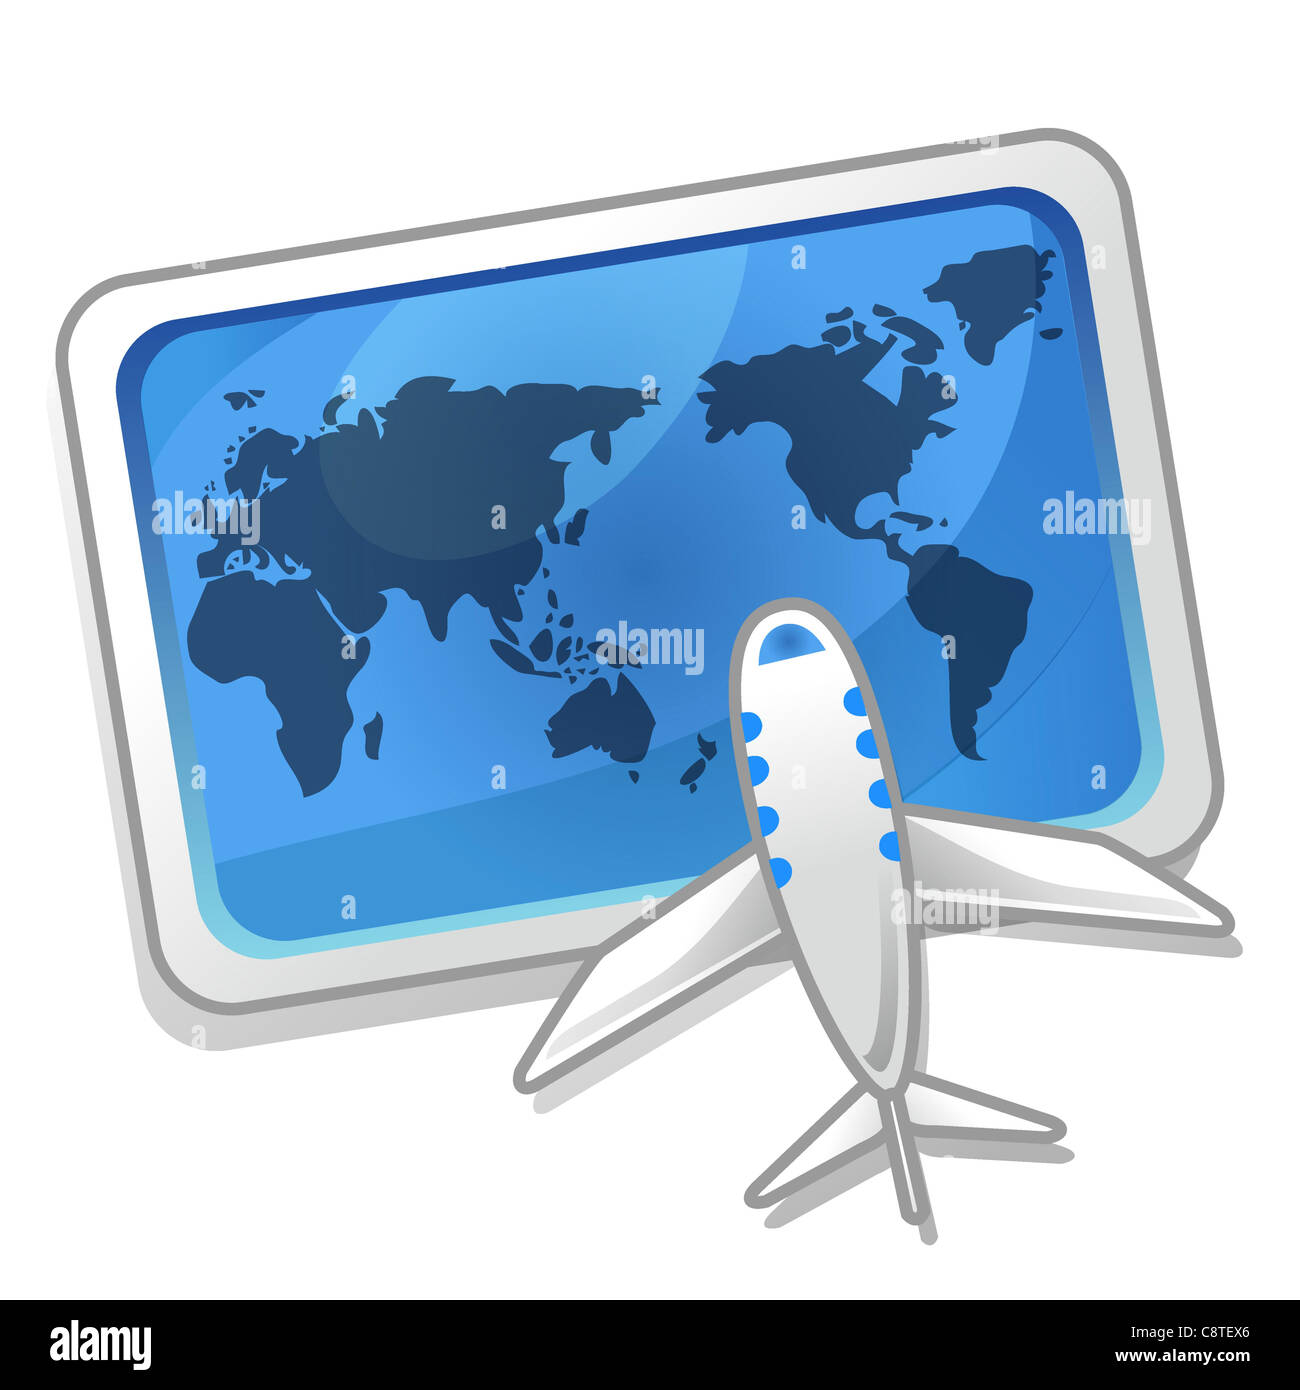 Illustration of world map and airplane Stock Photo - Alamy